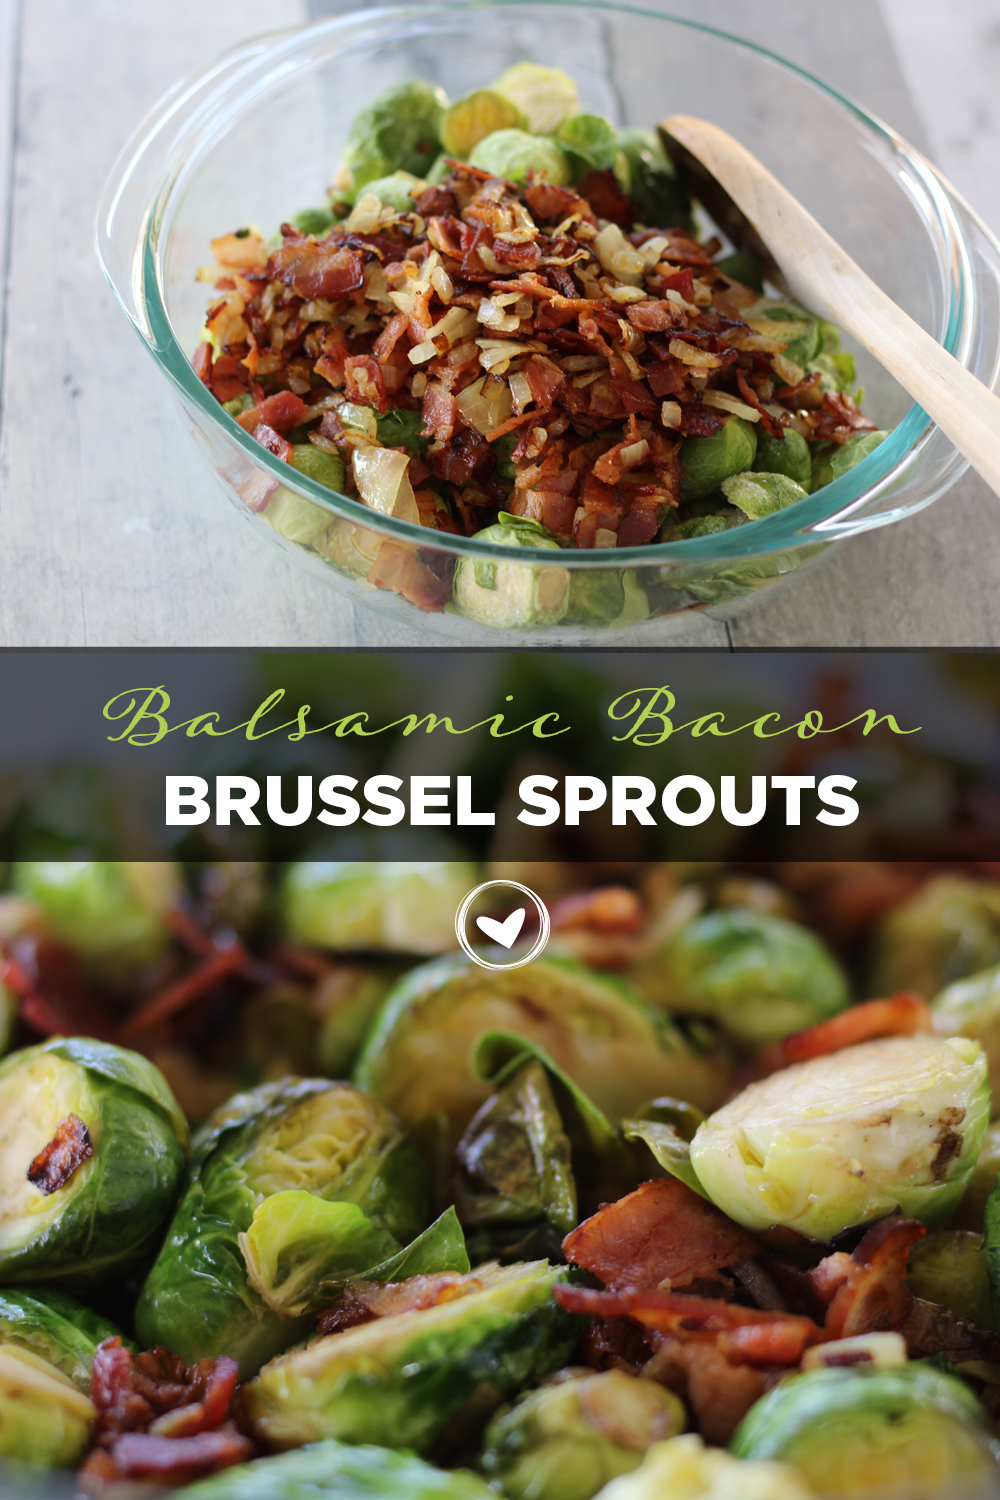 Balsamic Bacon Brussel Sprouts